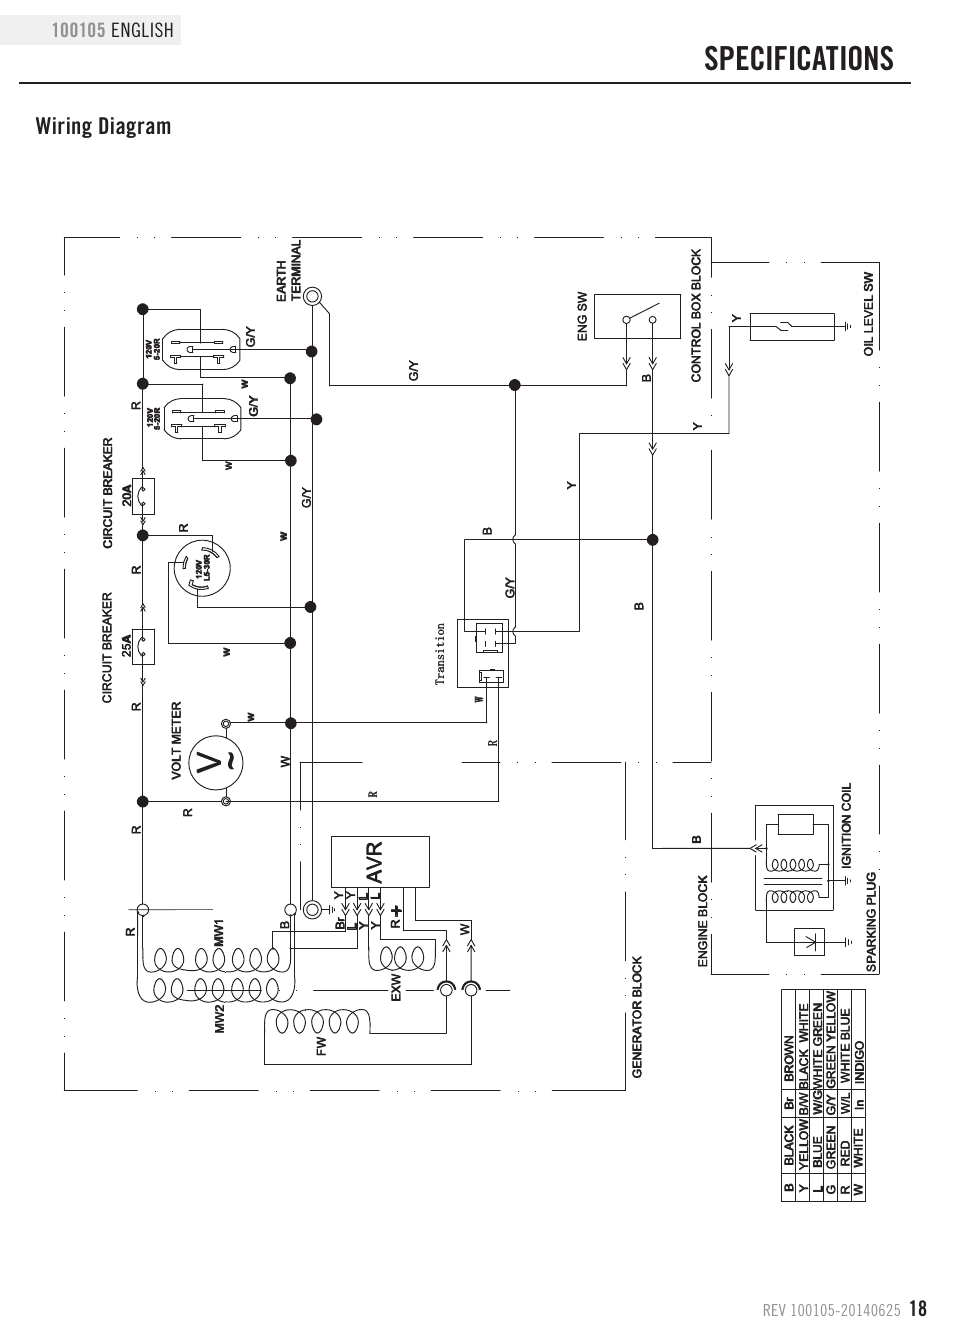 Schematic Swamp Cooler Switch Wiring Diagram from www.manualsdir.com